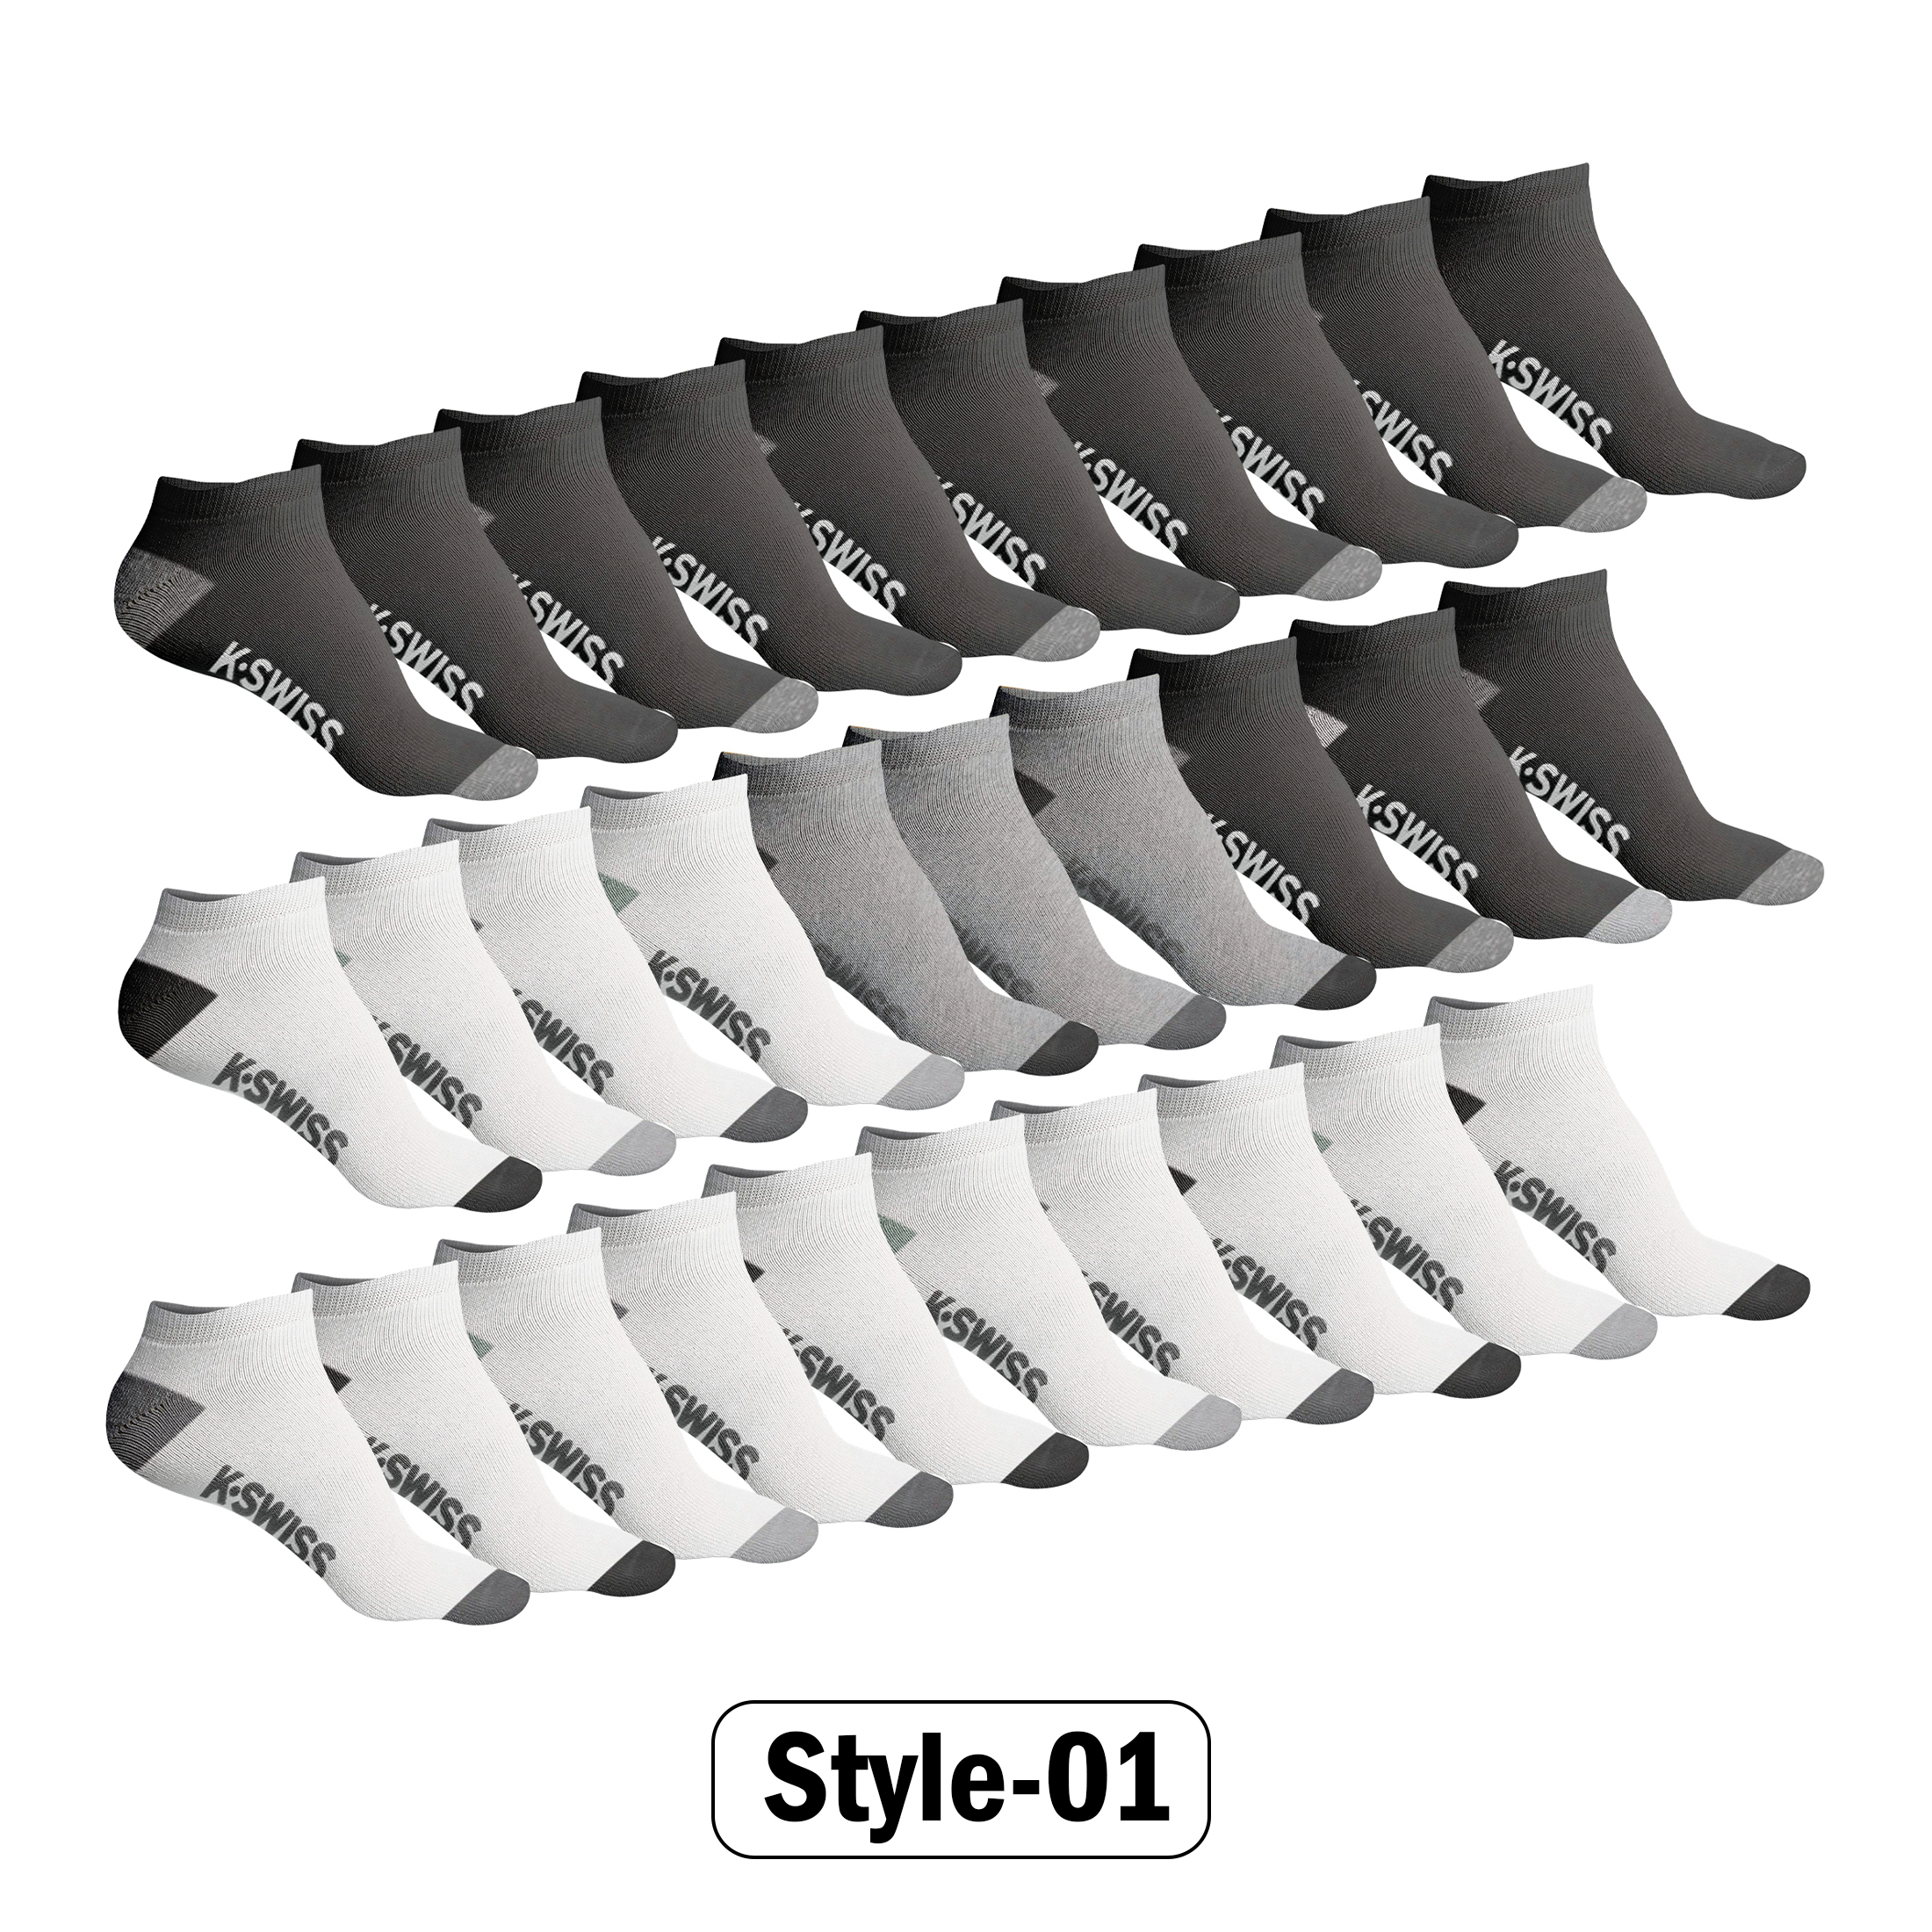 20-Pairs: Men's Athletic Comfort No Show Low Cut Ankle Socks - Style 1